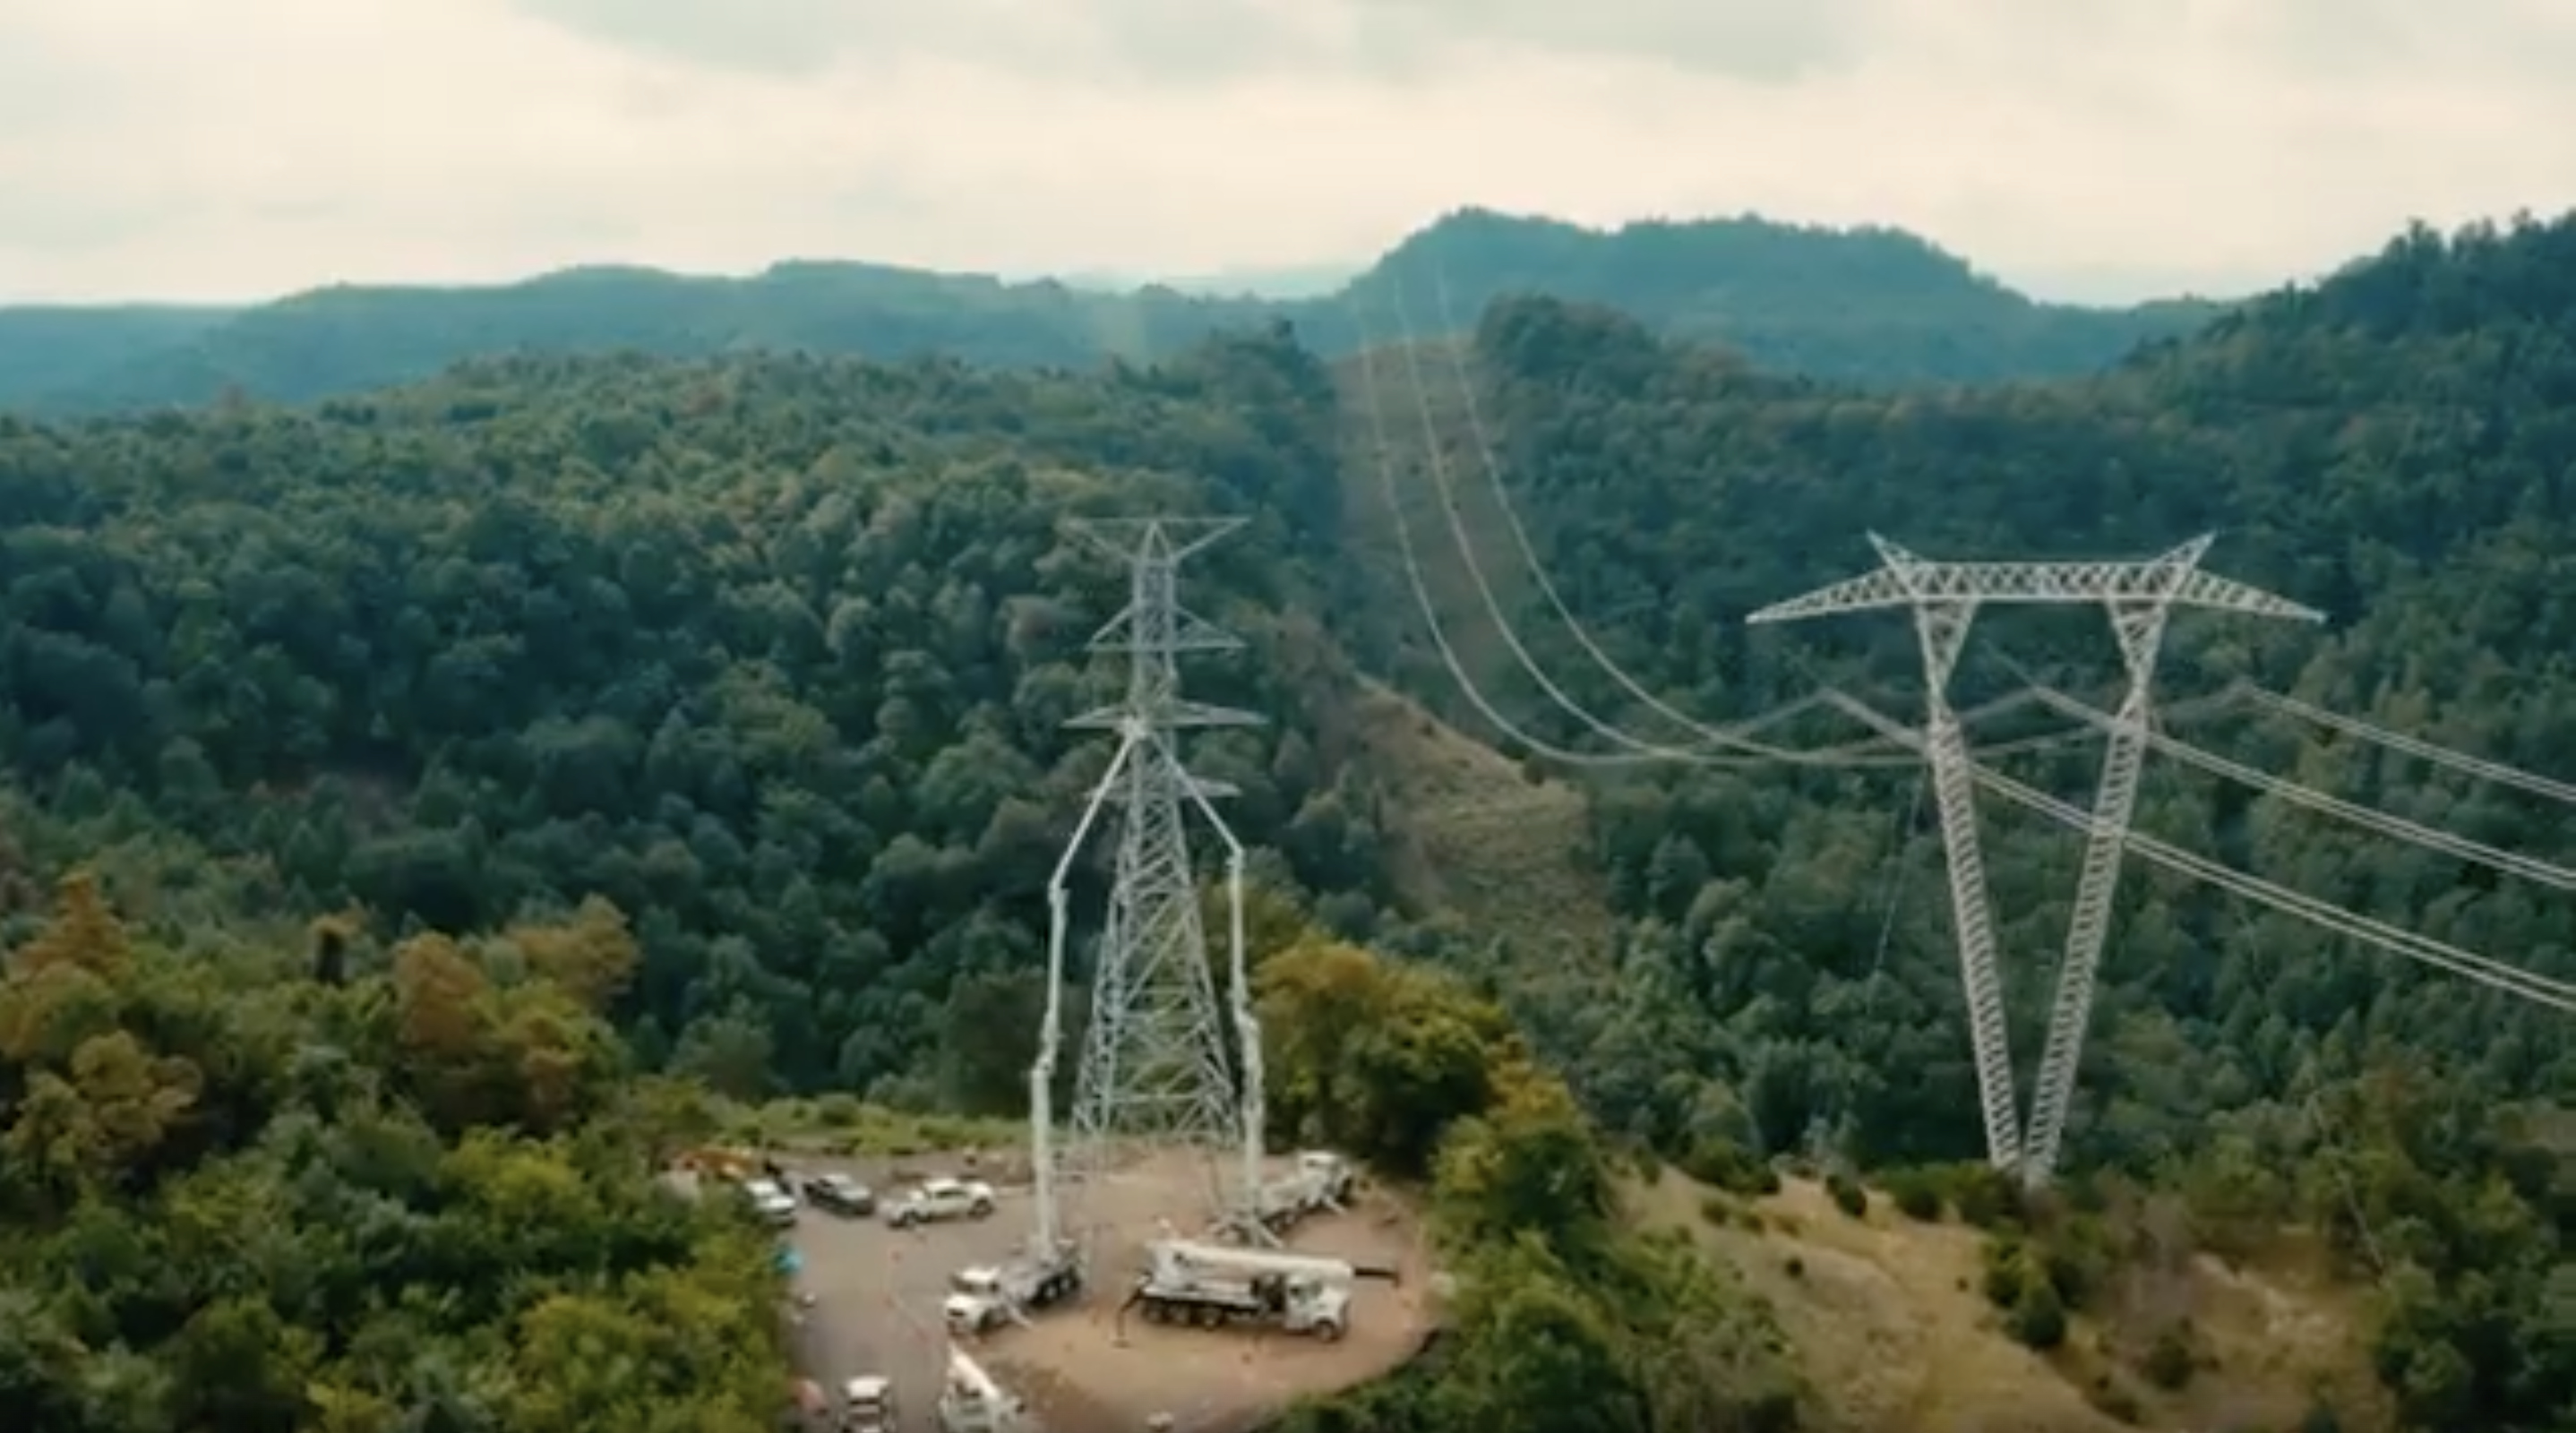 arial view of power lines across a wooded landscape